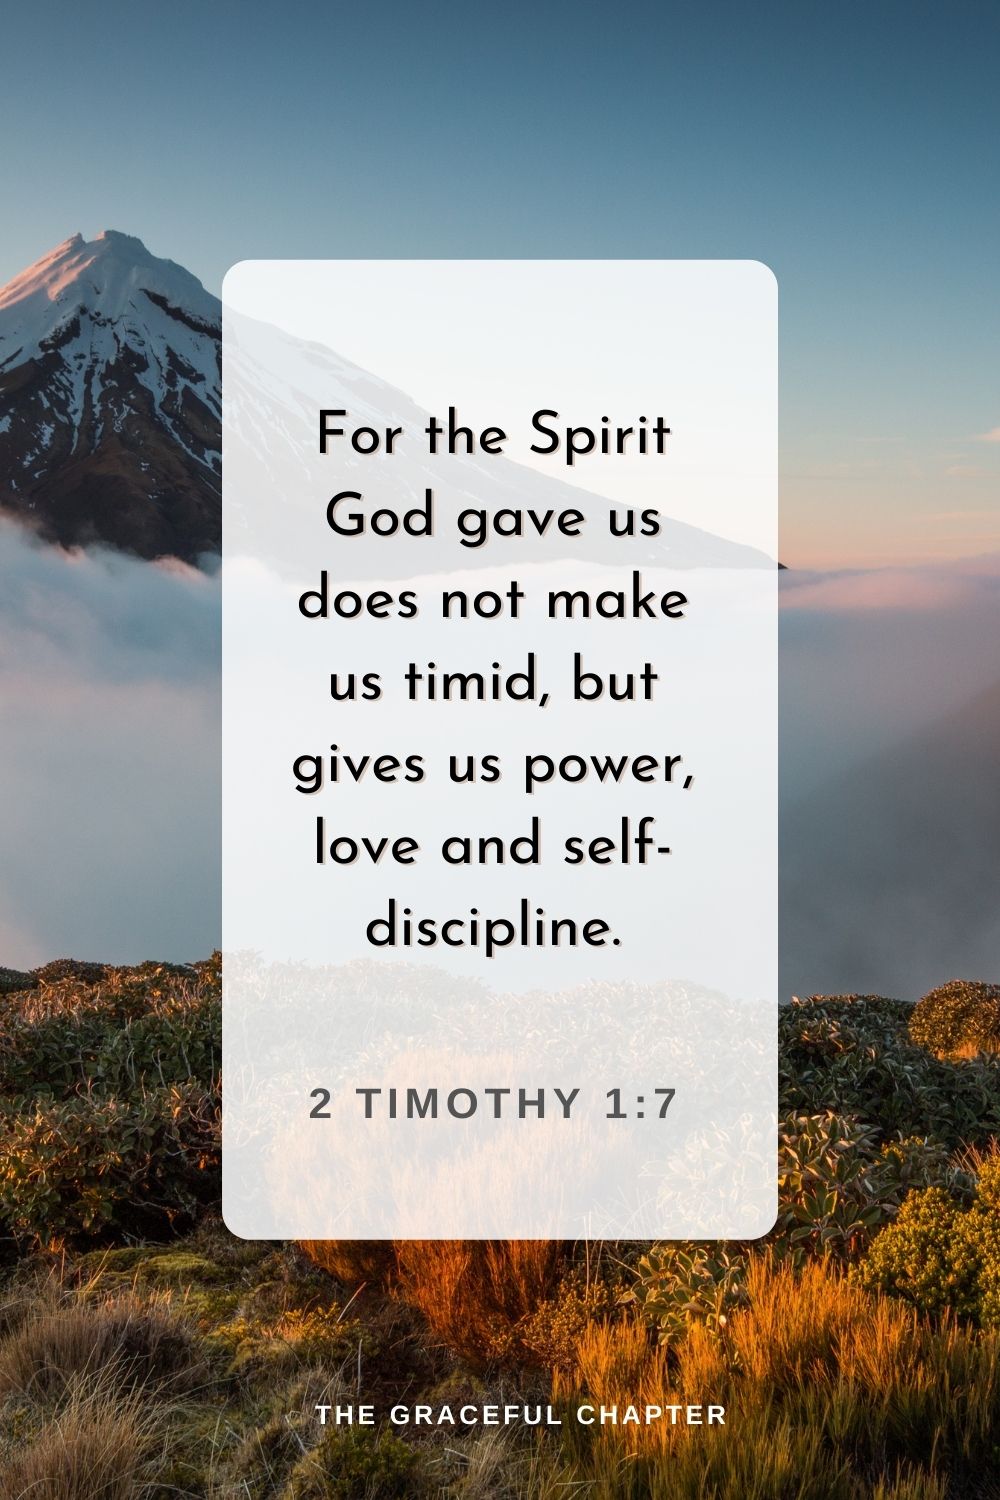 For the Spirit God gave us does not make us timid, but gives us power, love and self-discipline.